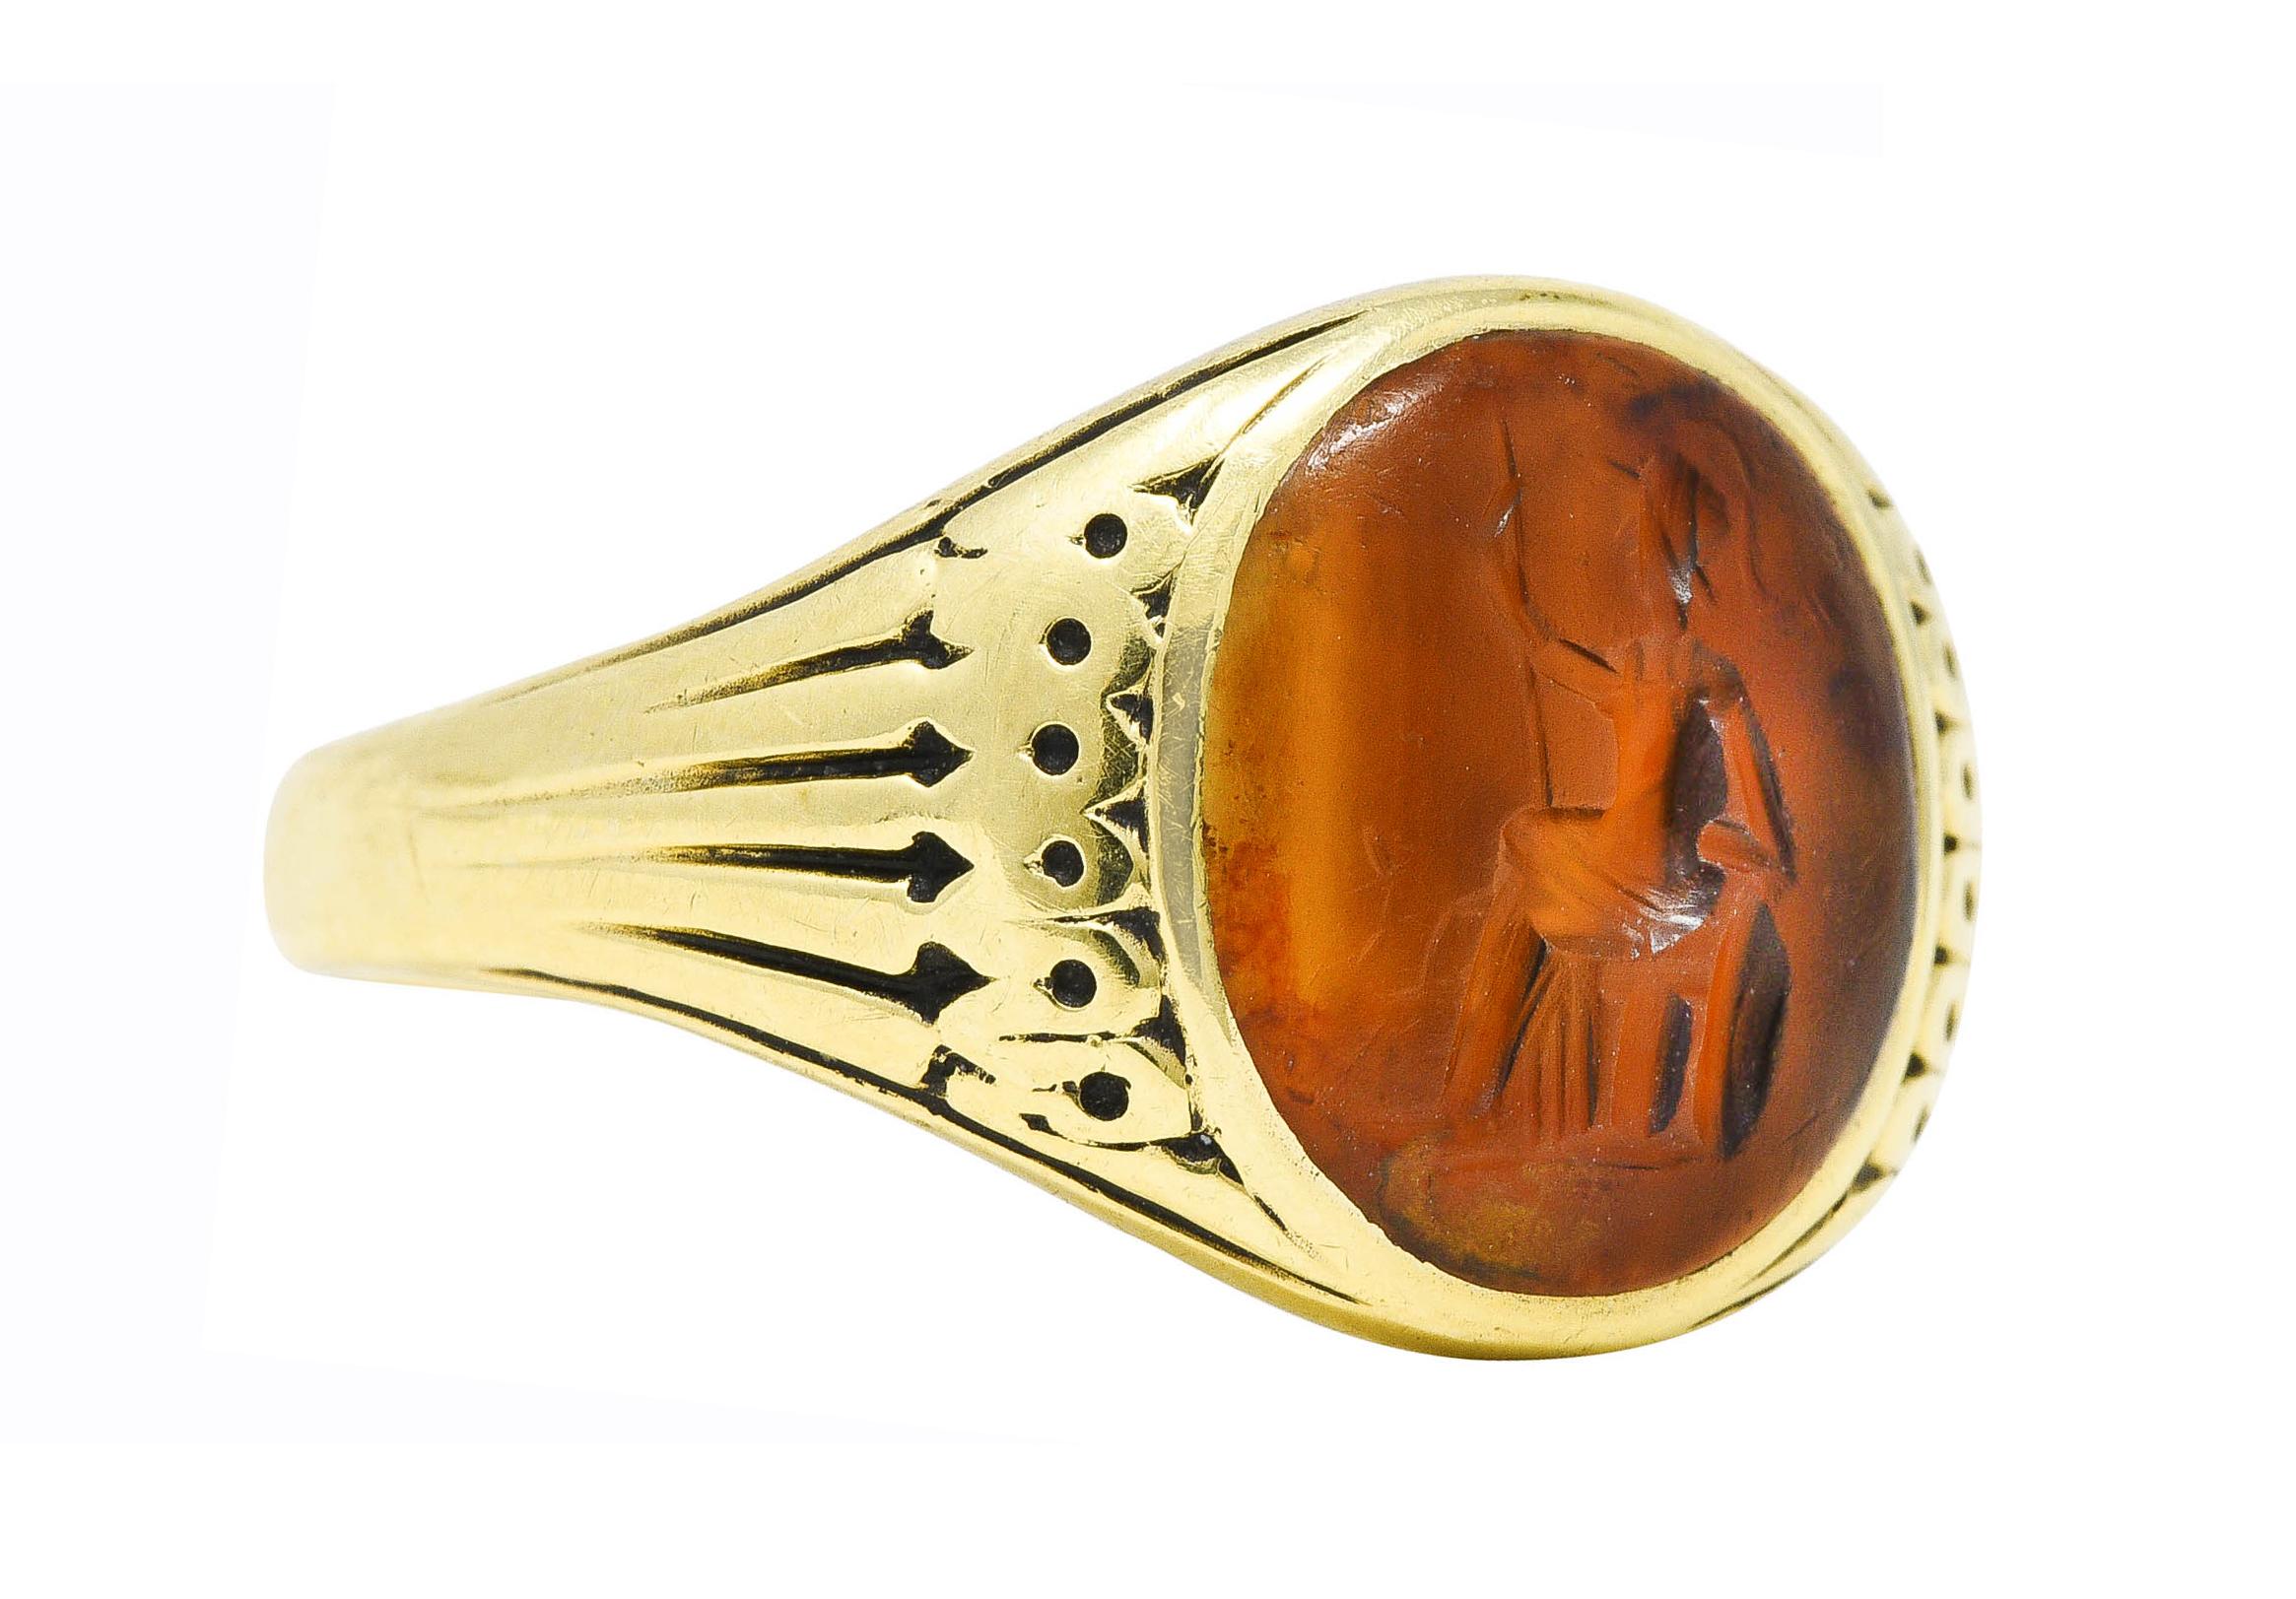 Ring centers a 10.5 x 11.5 mm inlaid tablet of banded agate with a carved intaglio

Translucent brownish orange with medium saturation and subtle banding

Depicting a seated pharaoh figure with staff and draped robes

Flanked by decoratively